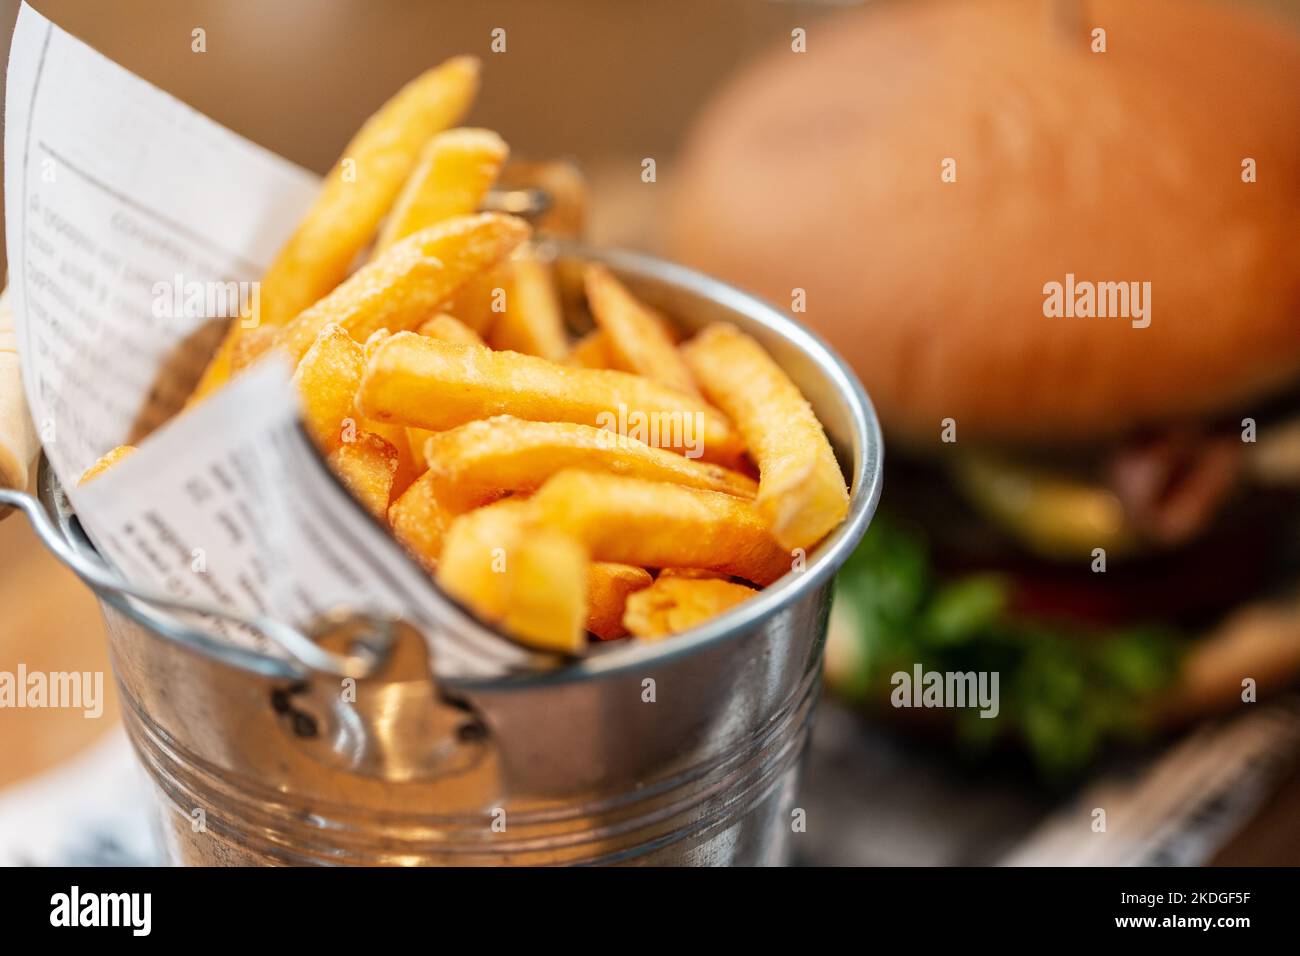 close up of french fries and burger at restaurant Stock Photo